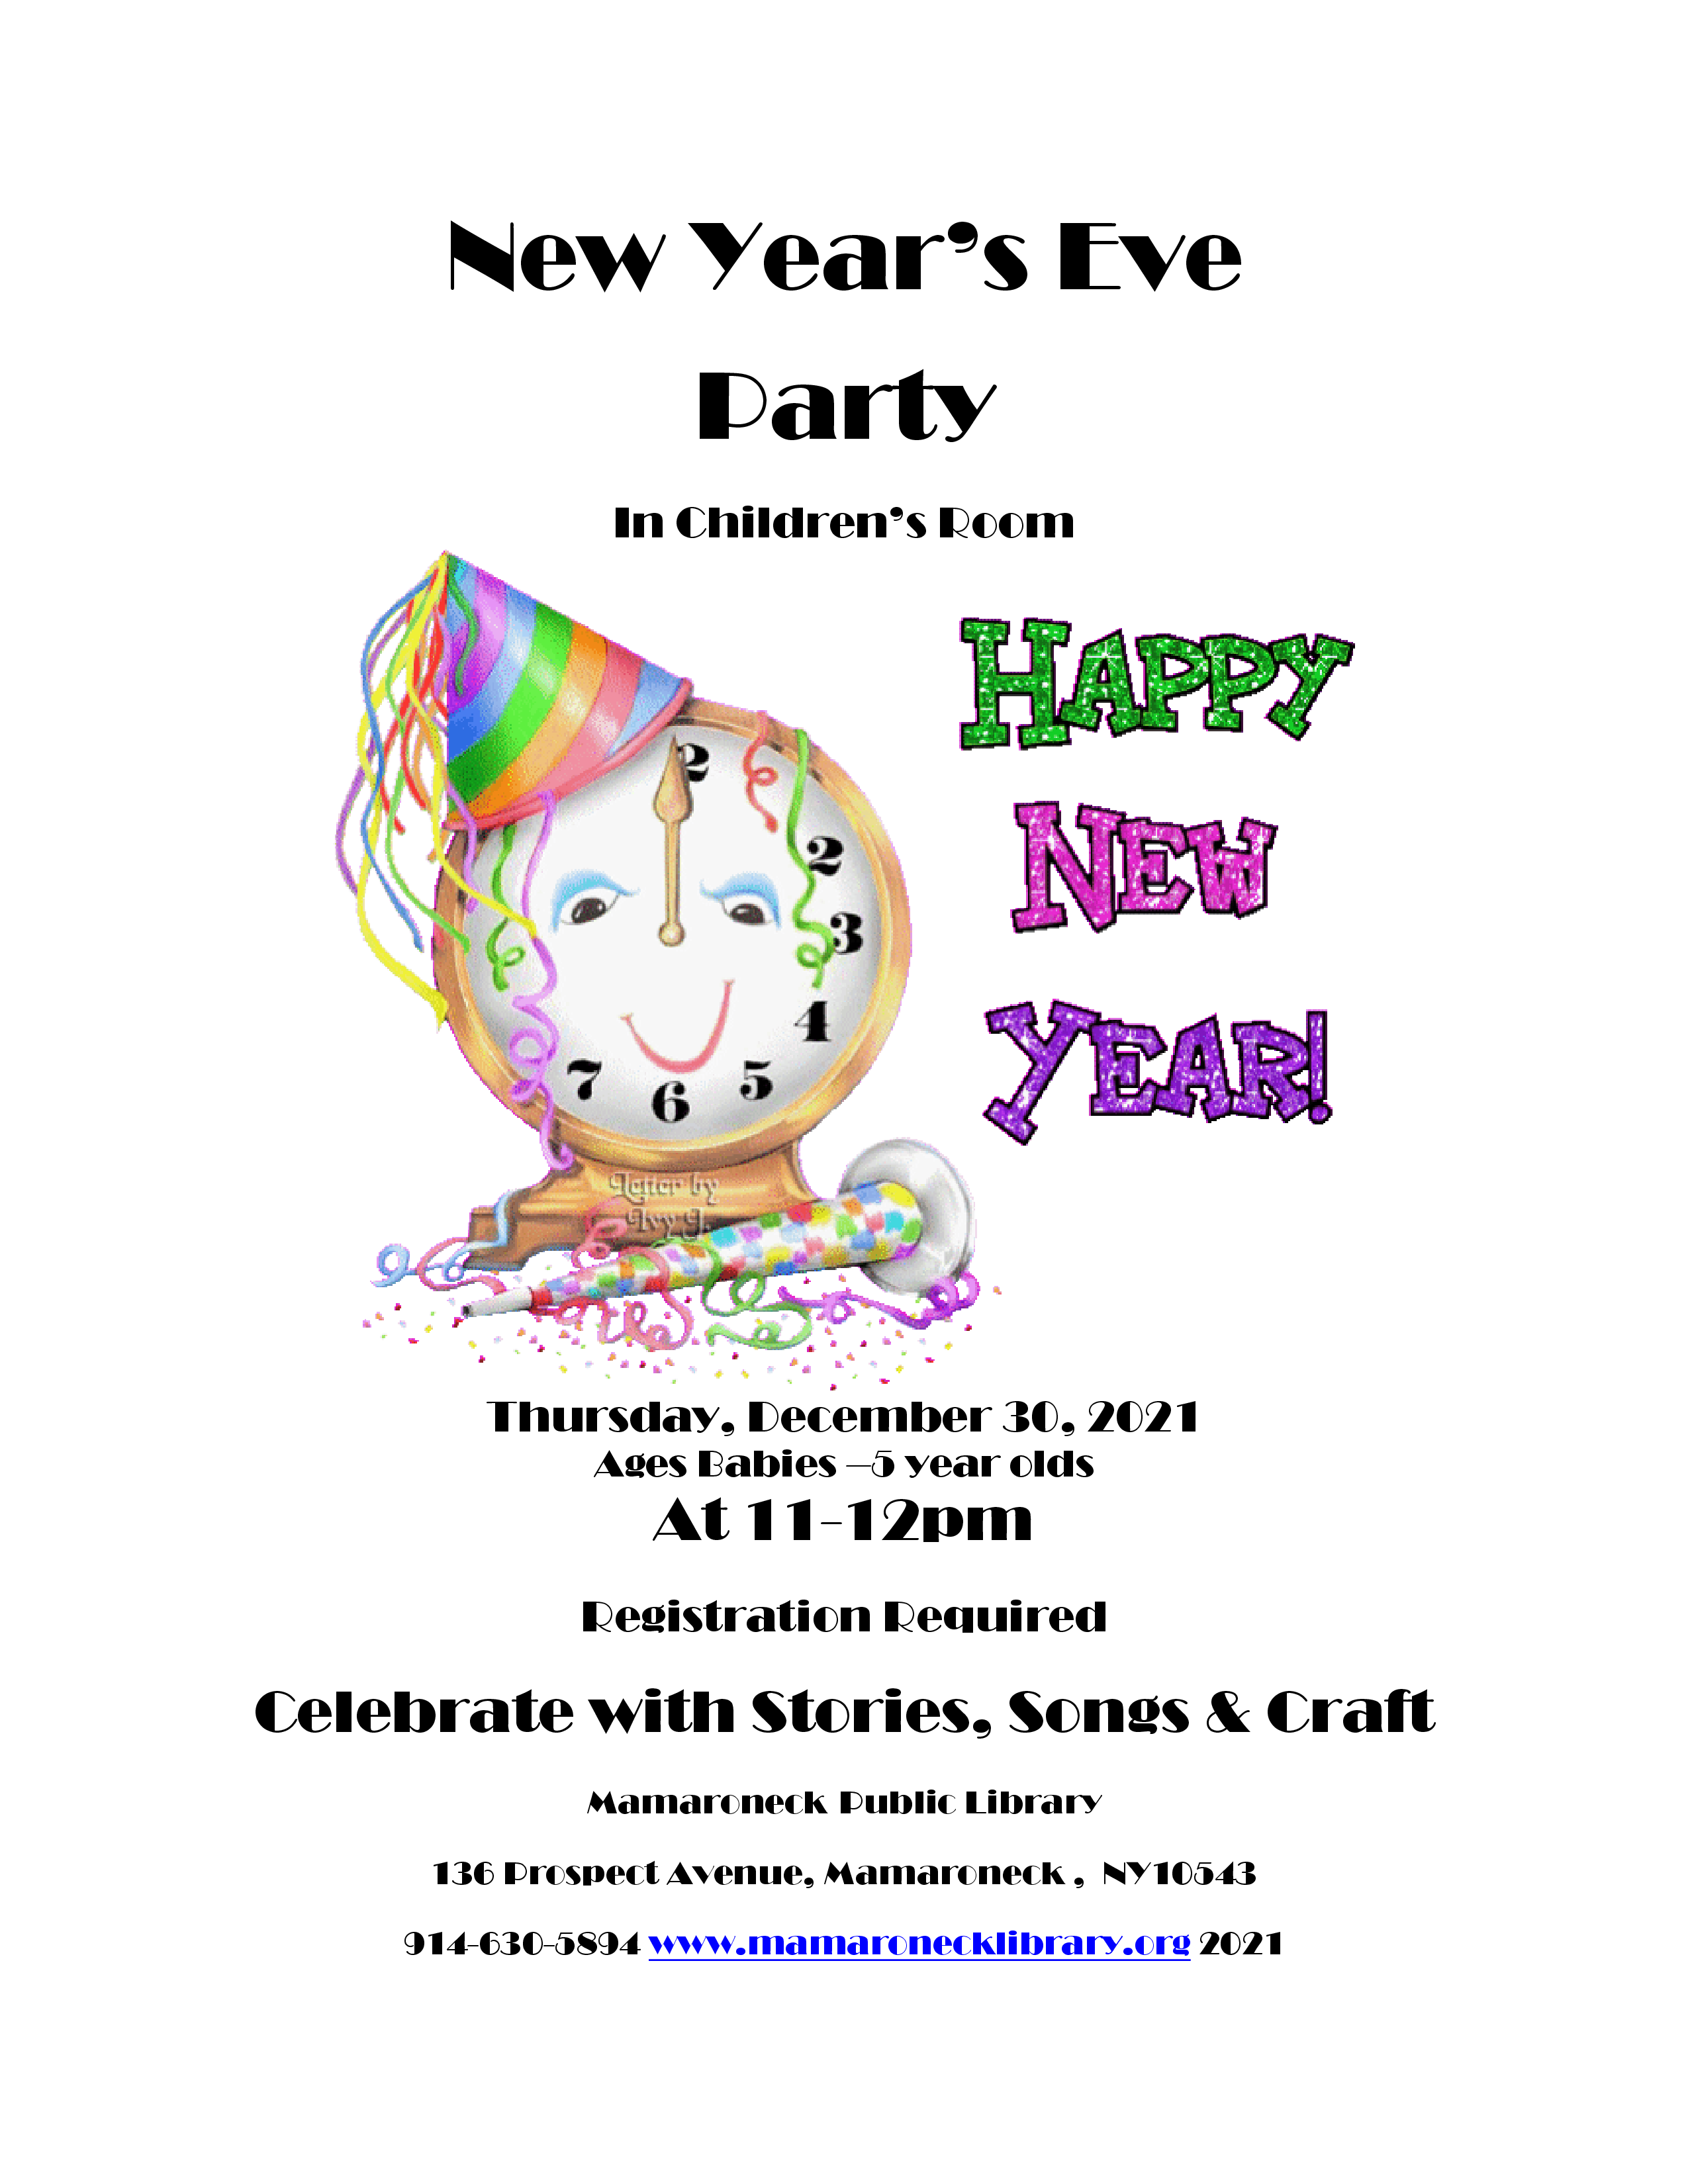 New Year's Eve party for preschool children